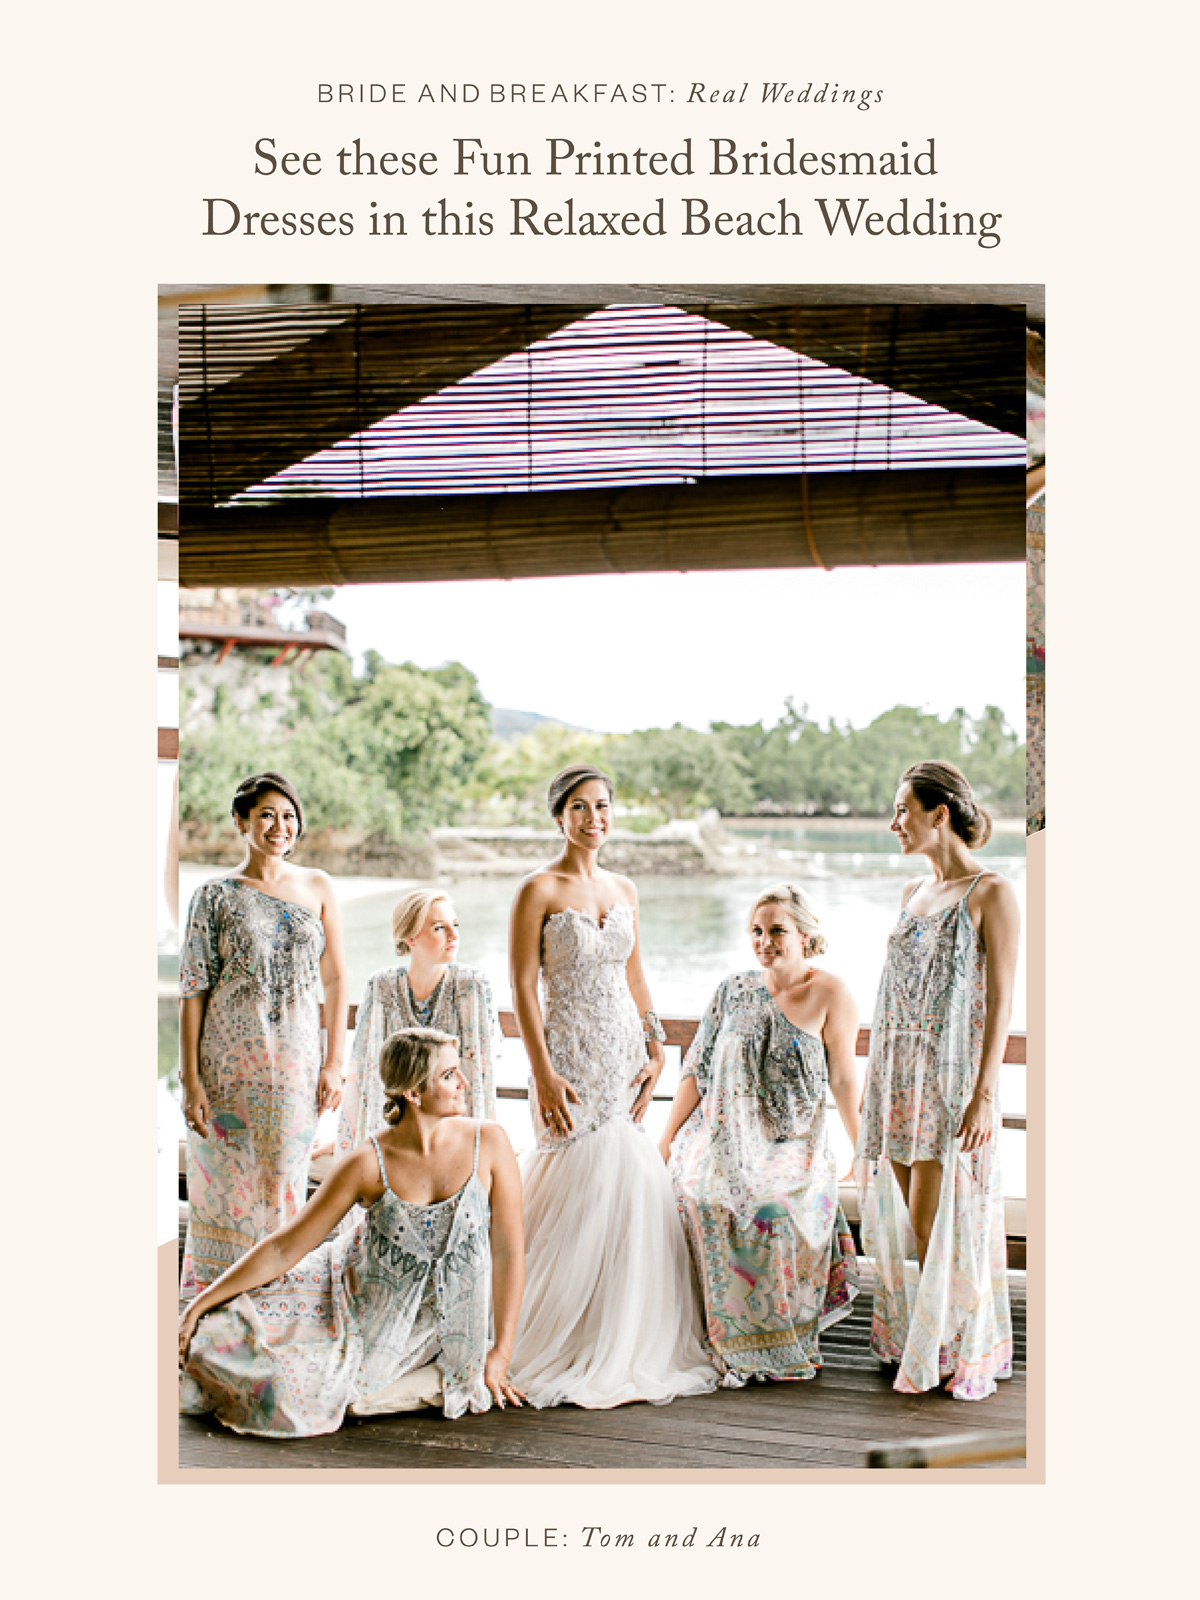 See these Fun Printed Bridesmaid Dresses in this Relaxed Beach Wedding